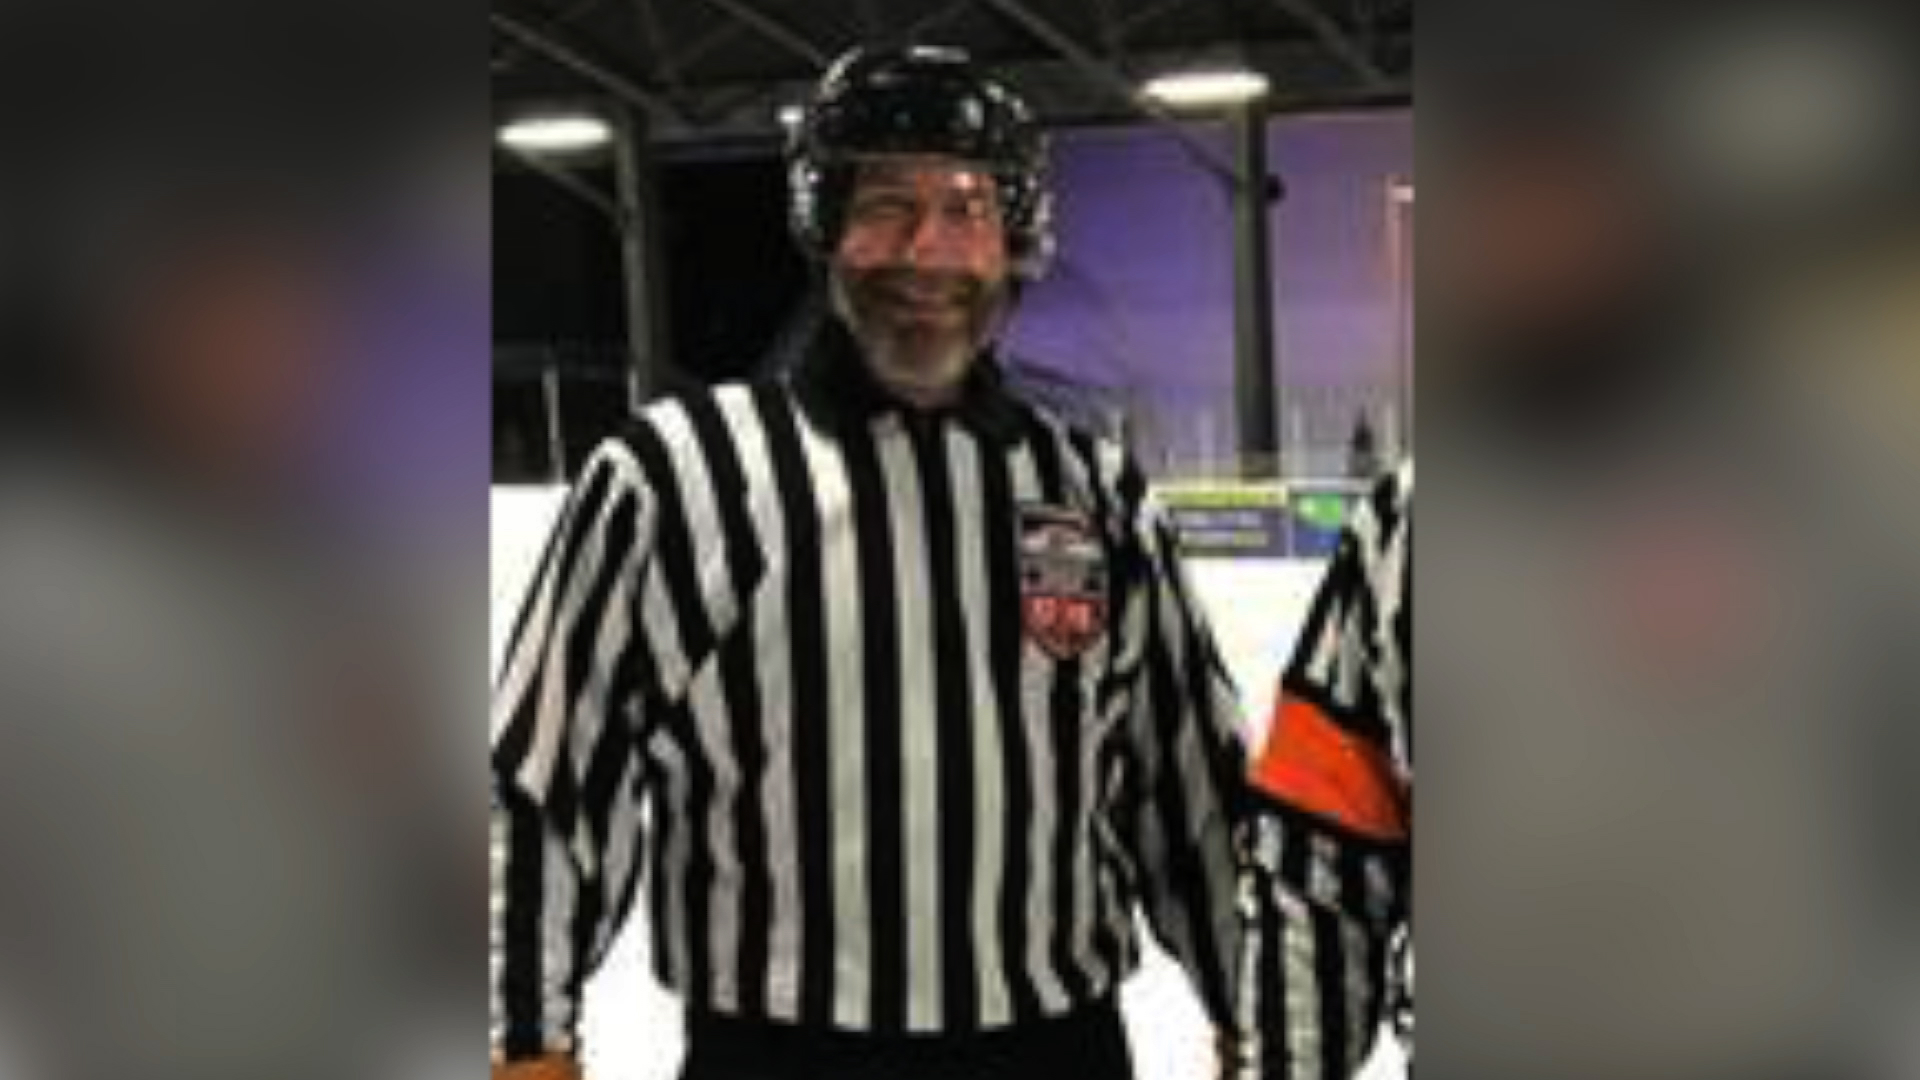 Hockey judge’s wife, who died of COVID, thinks he contracted it during the Carver Co. games – WCCO